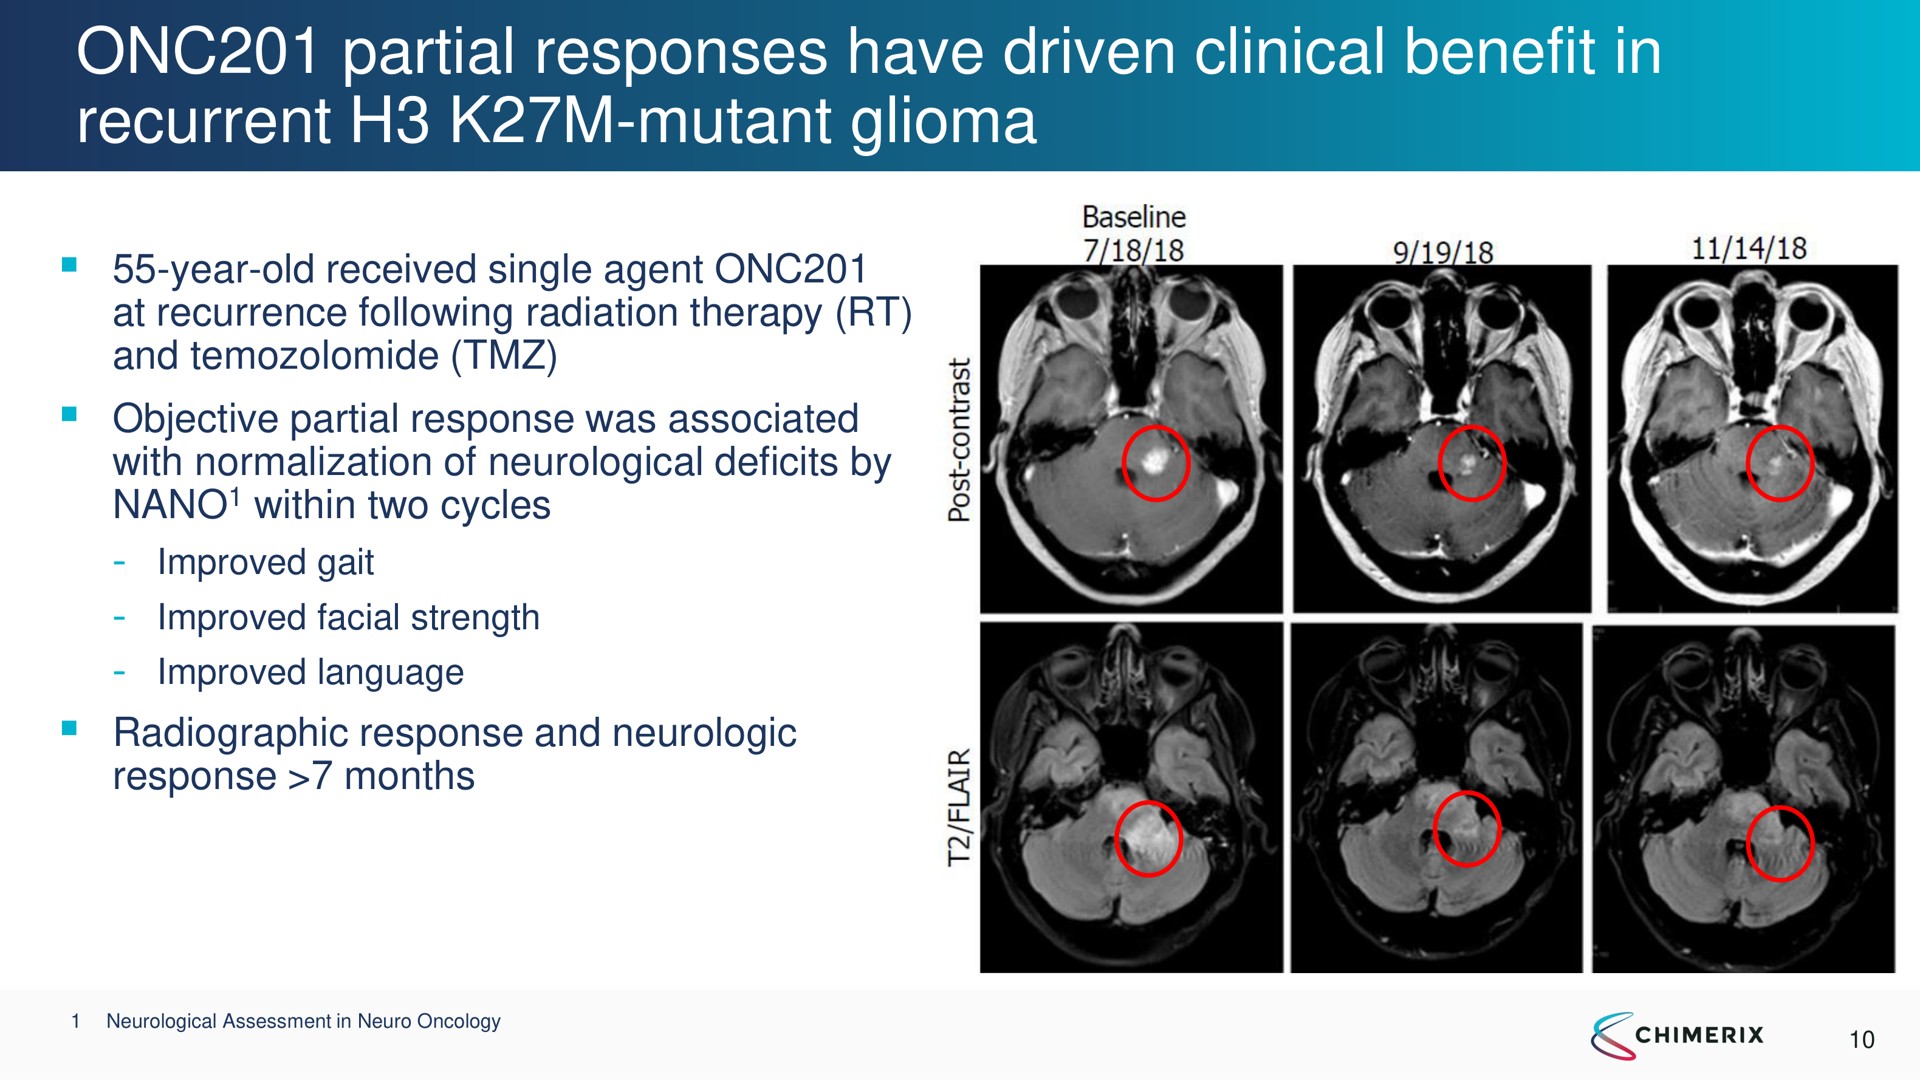 partial responses have driven clinical benefit in recurrent mutant glioma | Chimerix